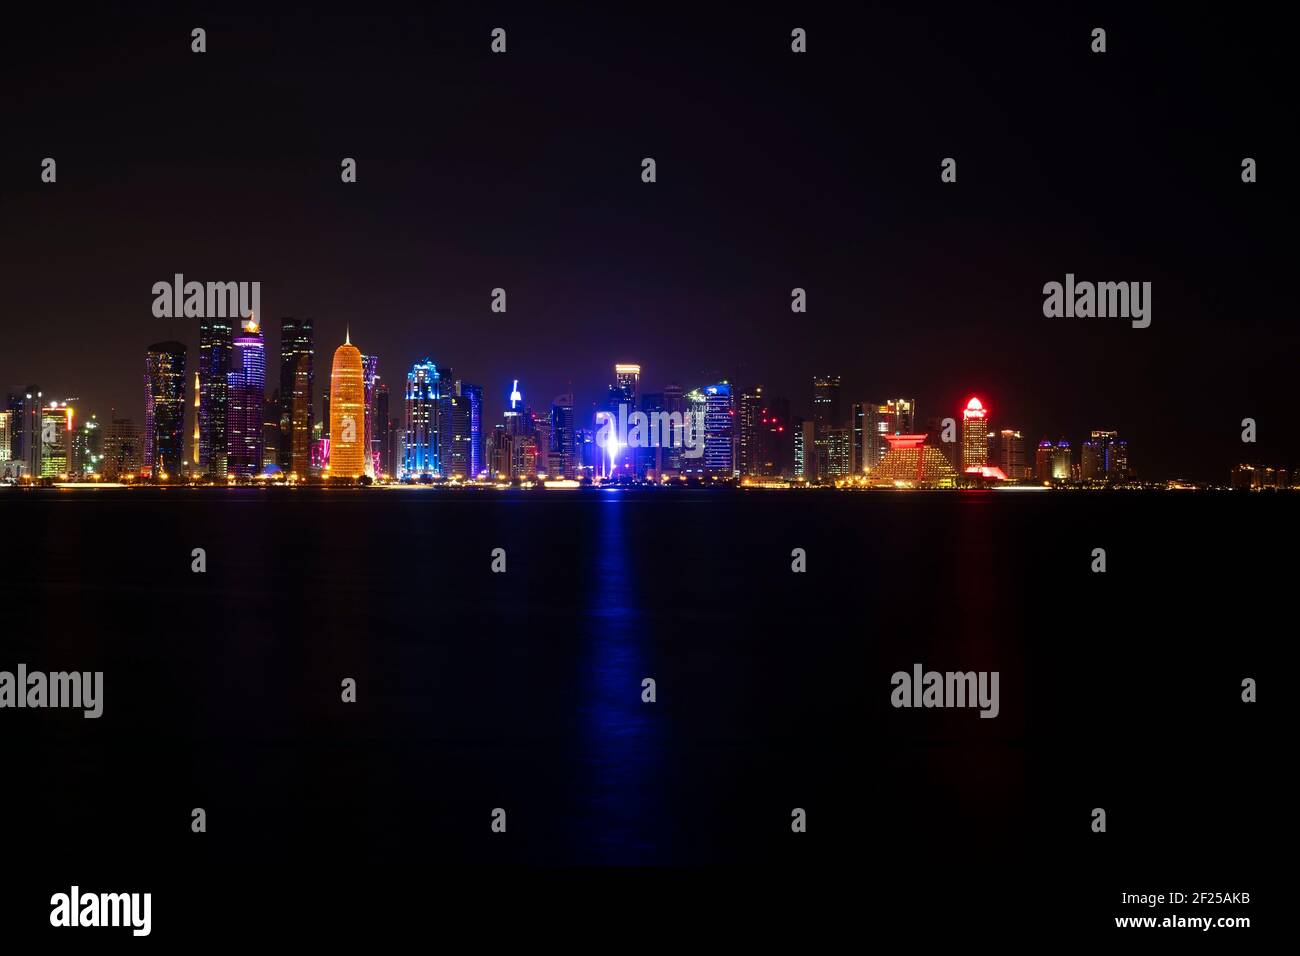 DOHA, QUATAR - JANUARY 21, 2019: View at Doha, Quatar at night. Doha is the capital and most populous city of the State of Qatar Stock Photo